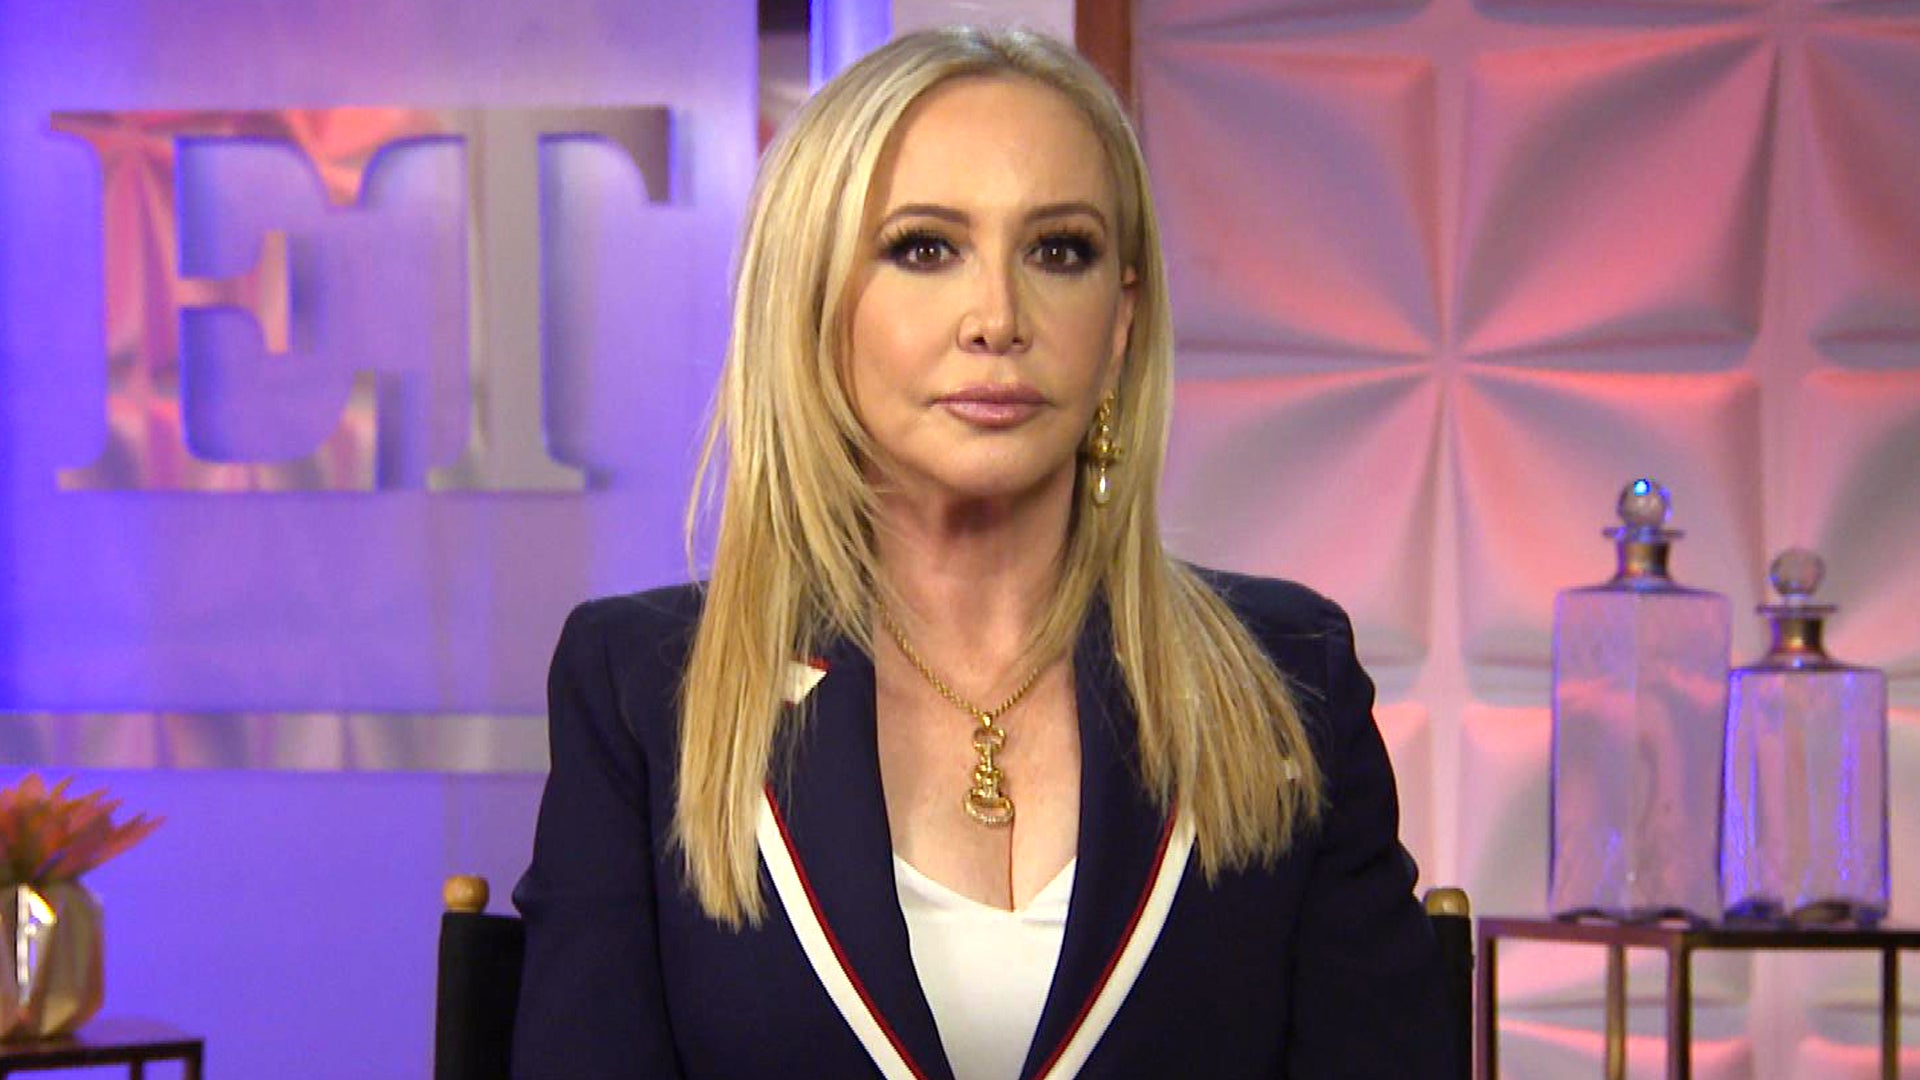 Shannon Beador 'Apologetic and Remorseful' Following Alleged DUI Hit and Run